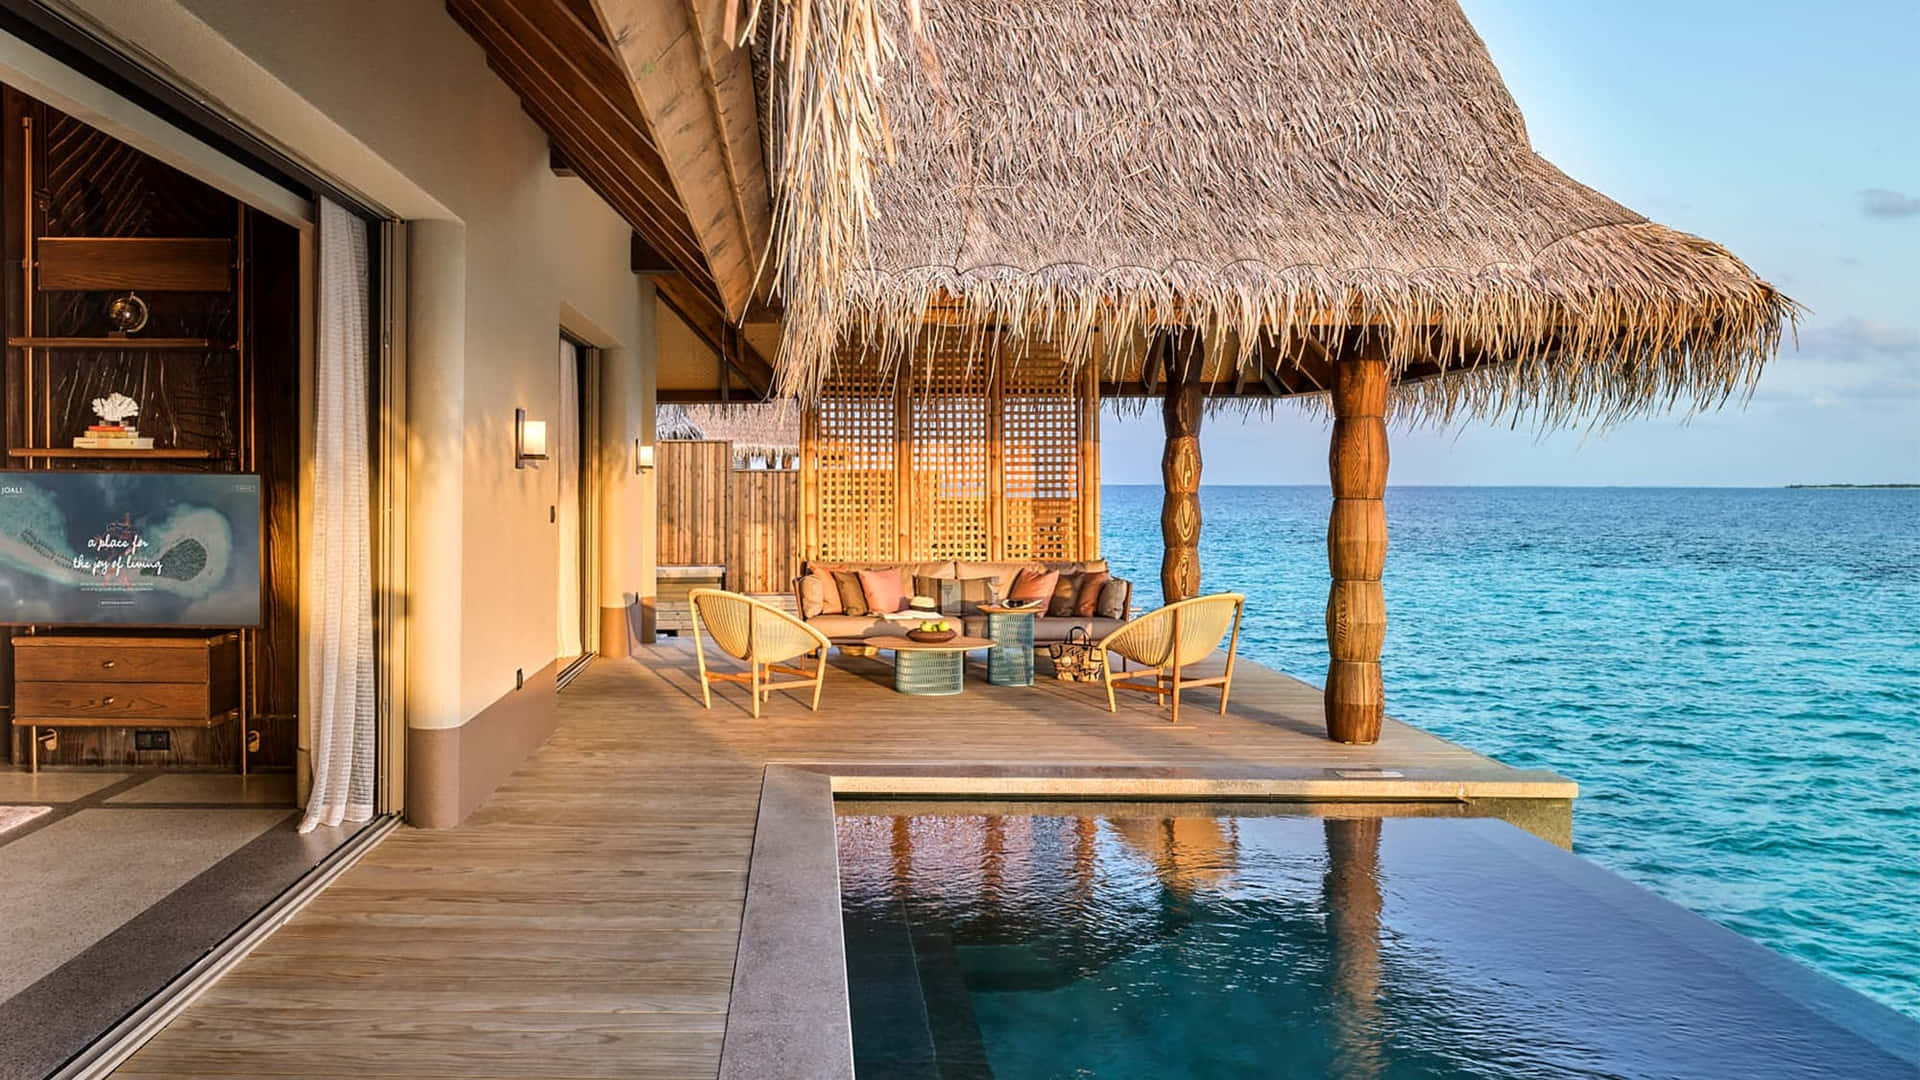 A Villa With A Pool And Thatched Roof Overlooking The Ocean